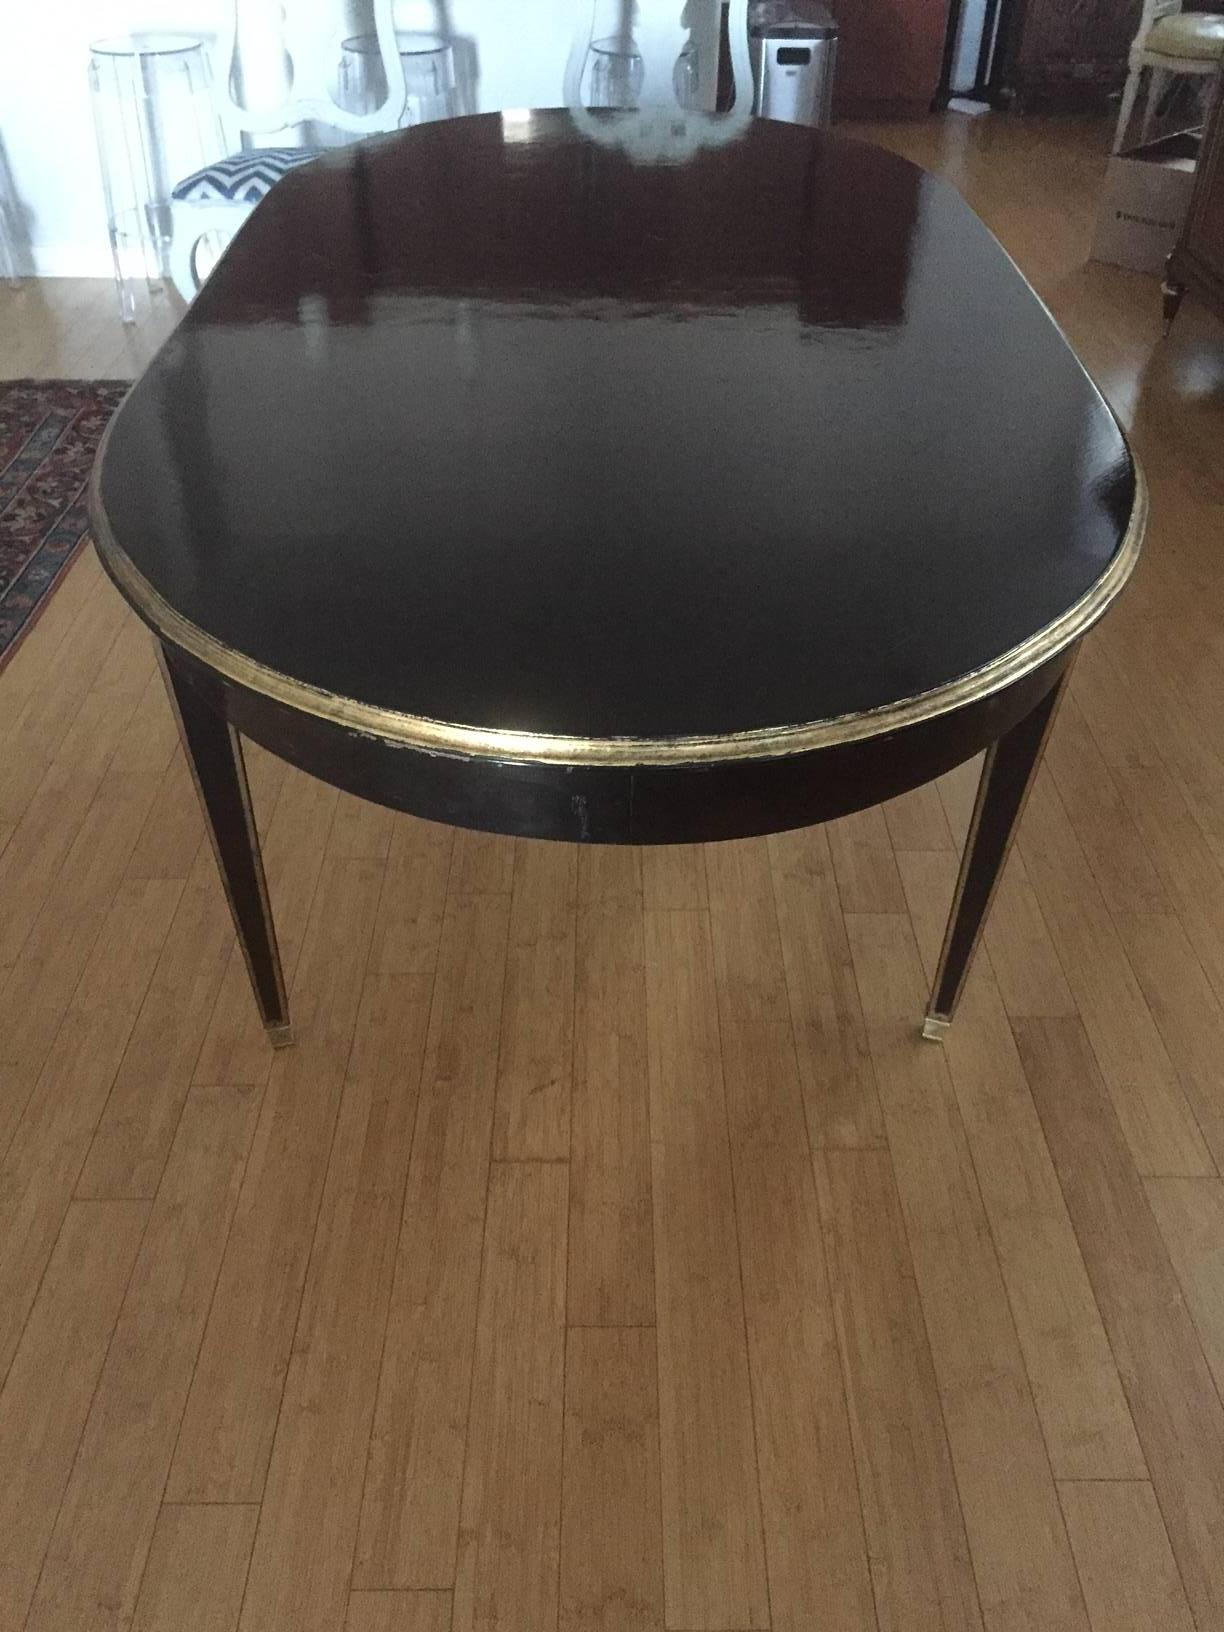 A solid black dining table with no leaves. Wasn't made to accommodate leaves. The space between the legs measures 40